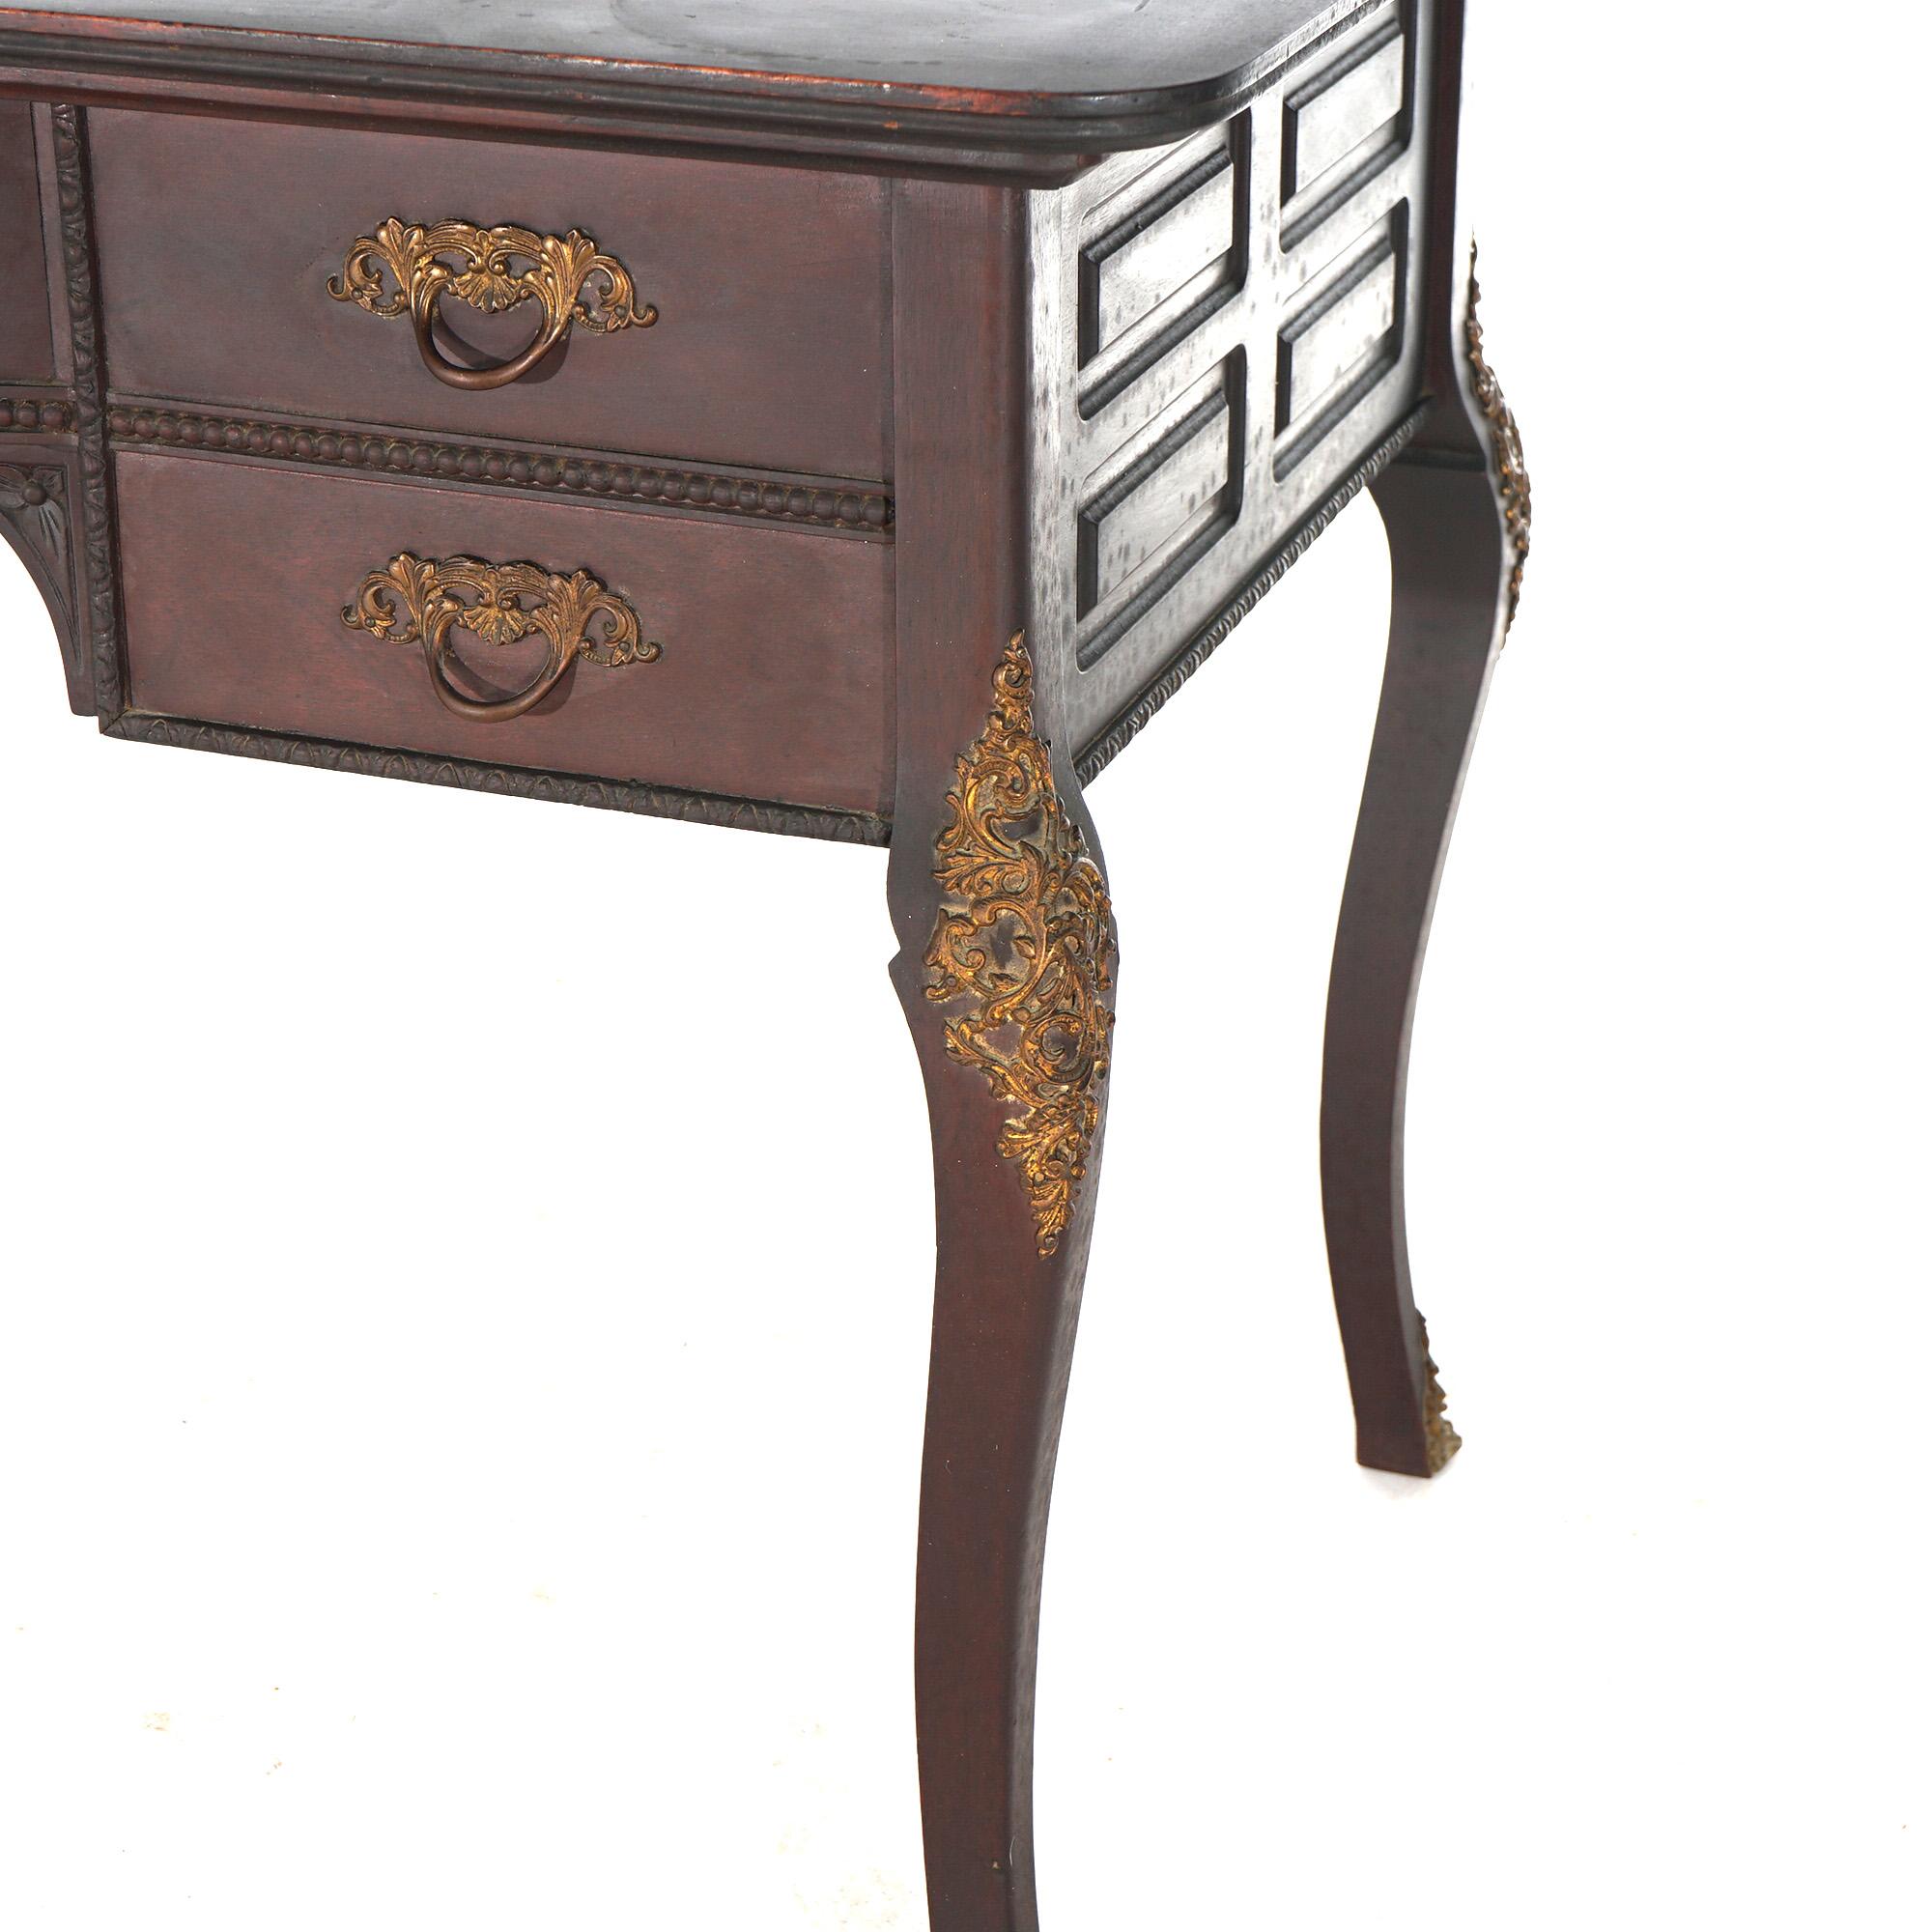 An antique French bureau plat writing desk offers shaped mahogany construction with paneled case with drawers, foliate cast ormolu mounts and raised on cabriole legs, c1910

Measures - 29.5